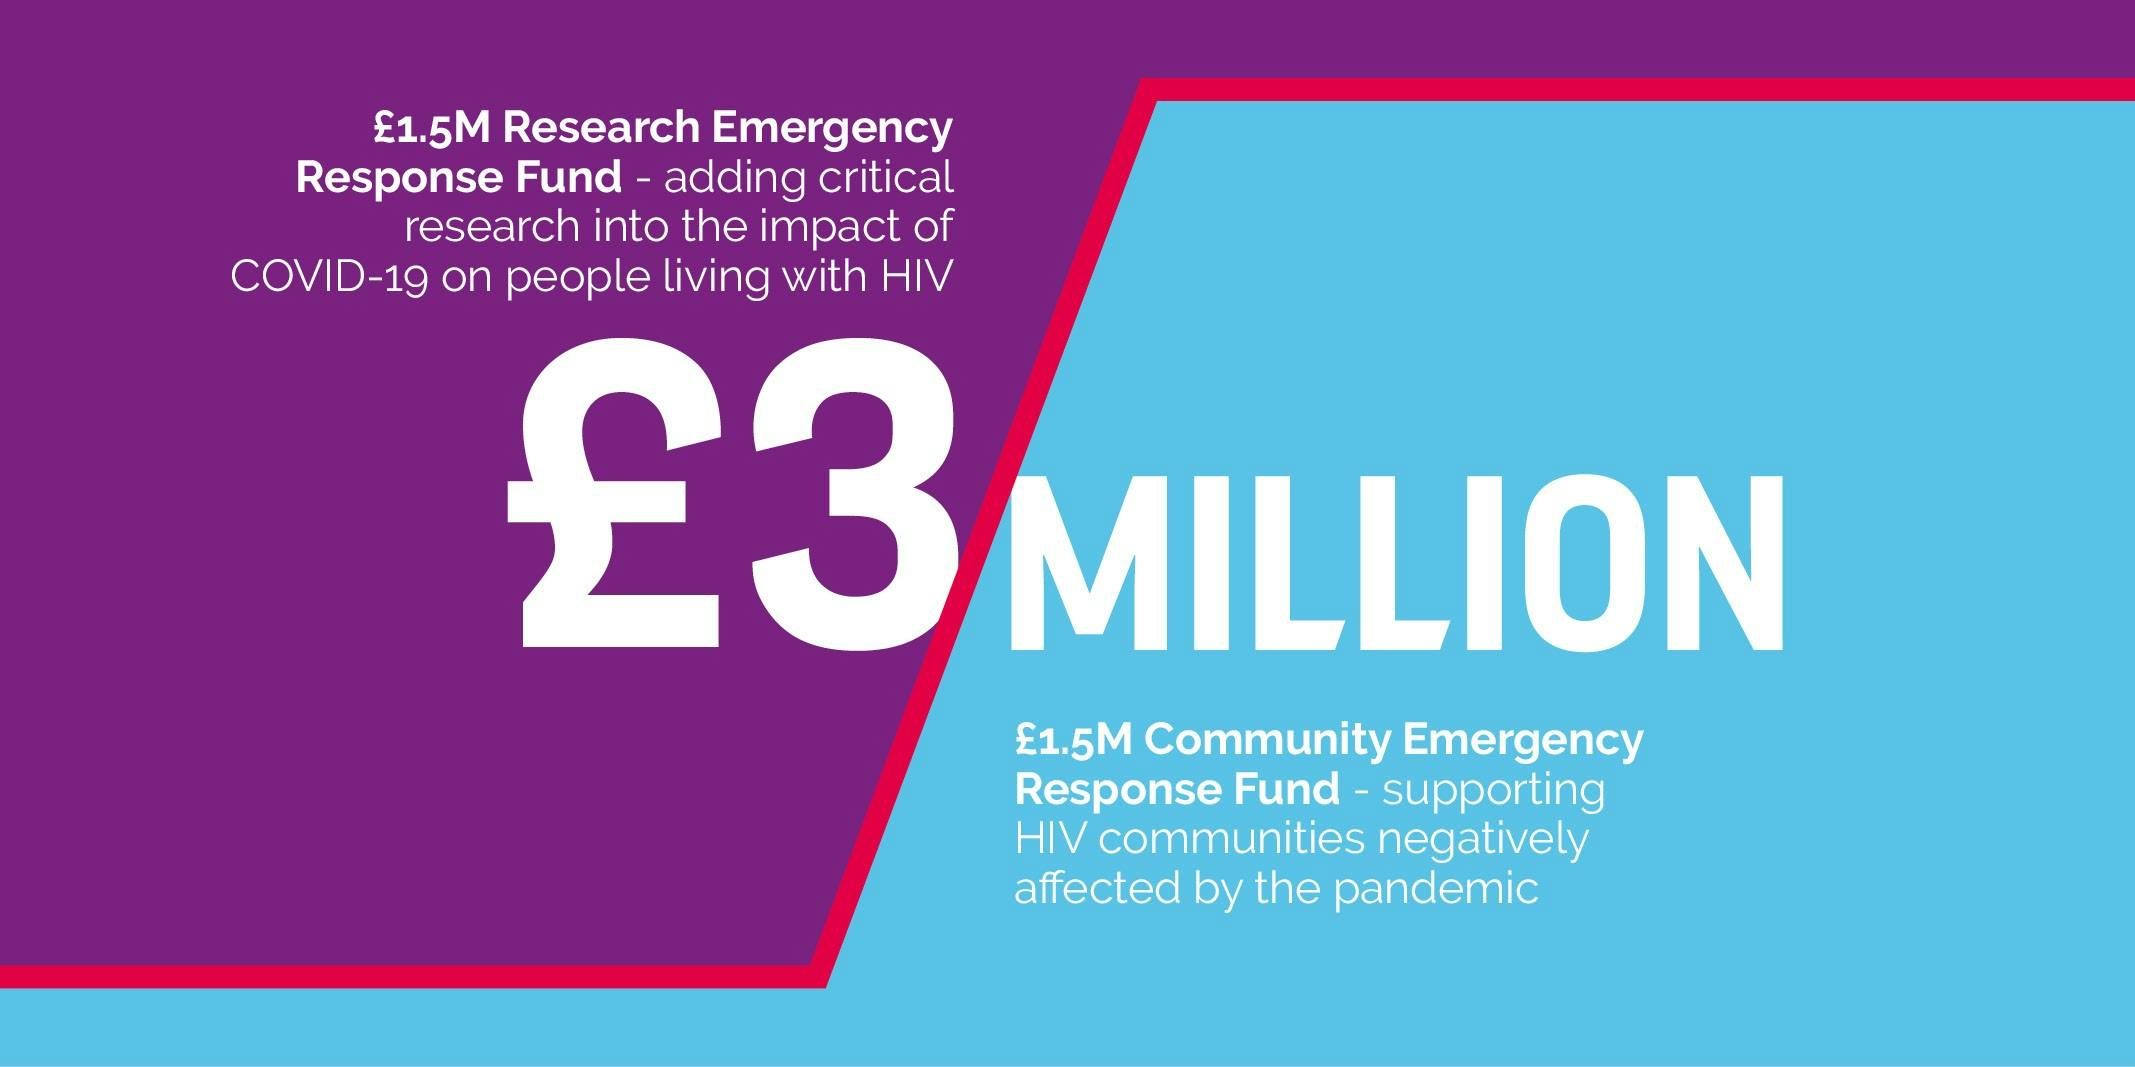 About the COVID-19 Emergency Response Fund